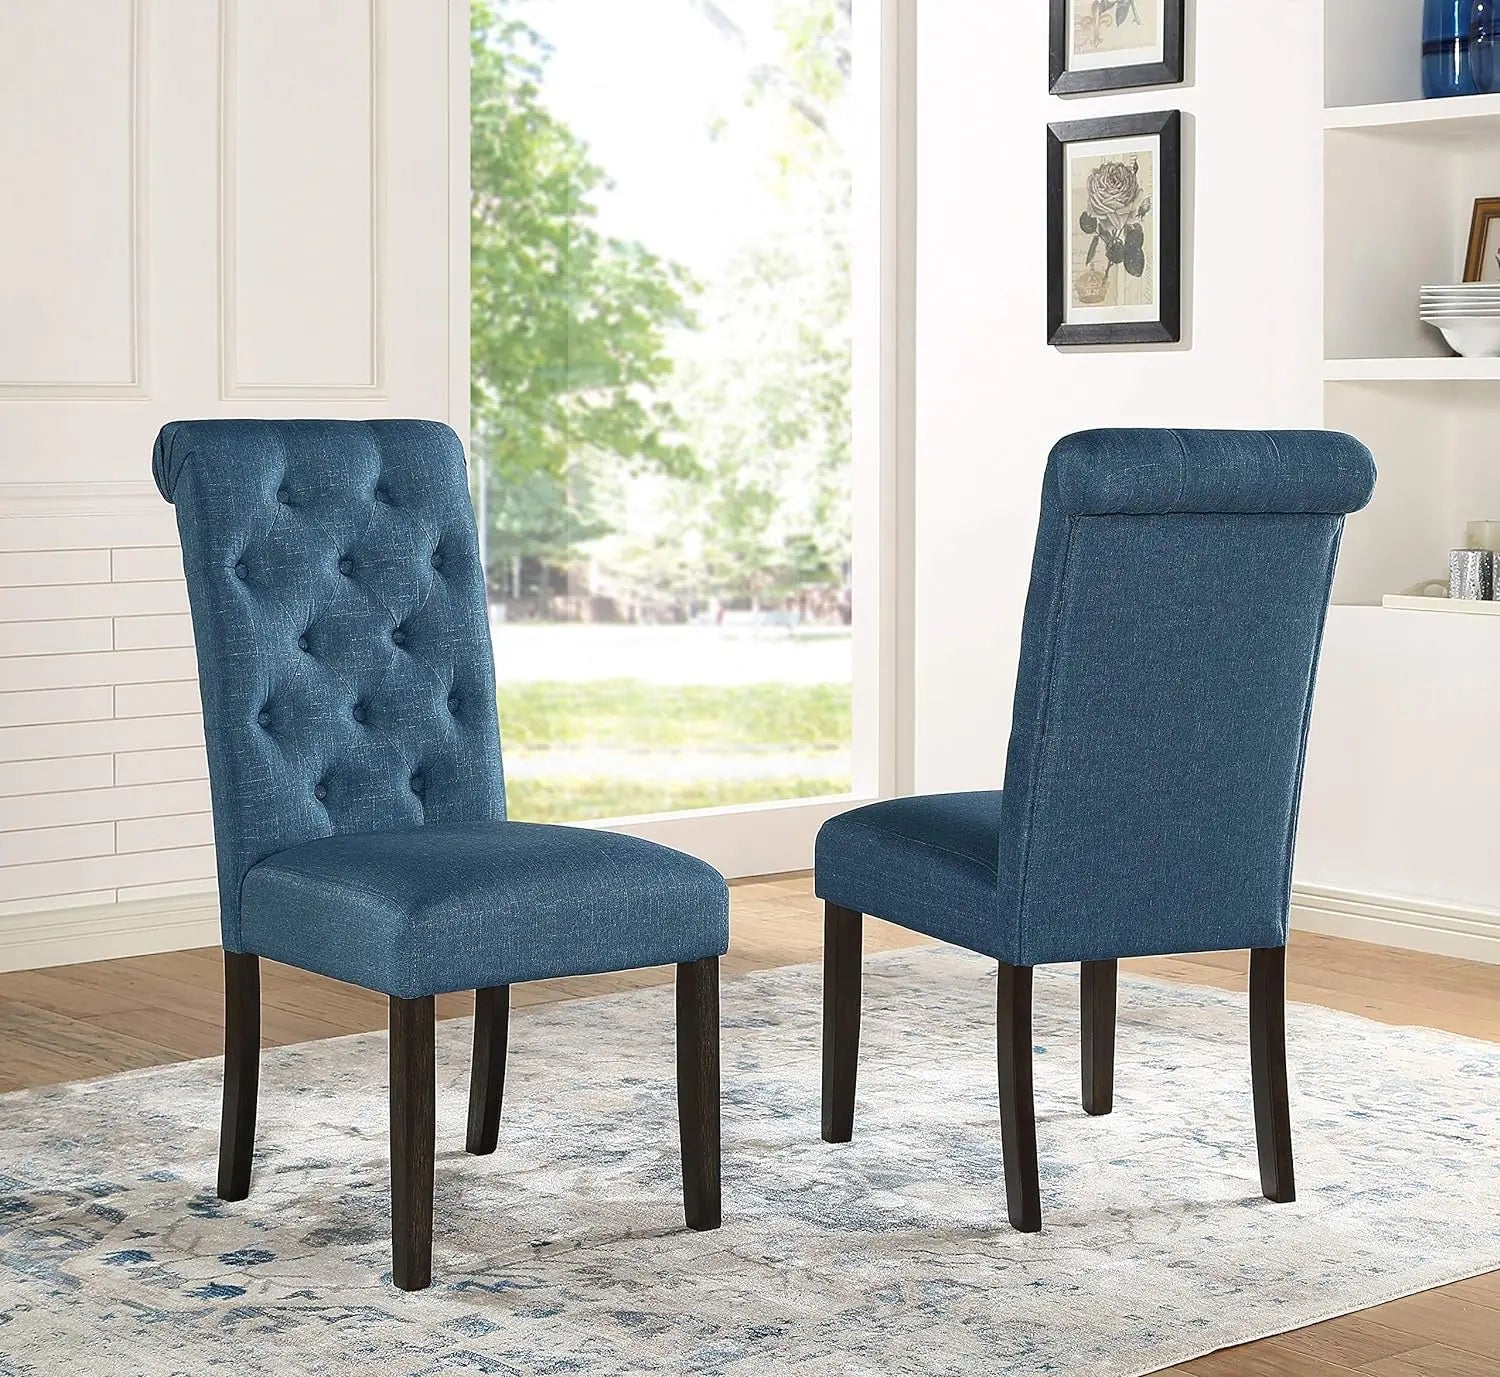 Set of 2 Kitchen Dining Chairs - Solid Wood Tufted Tan Chair, Modern Style, Home Furniture - Farefe